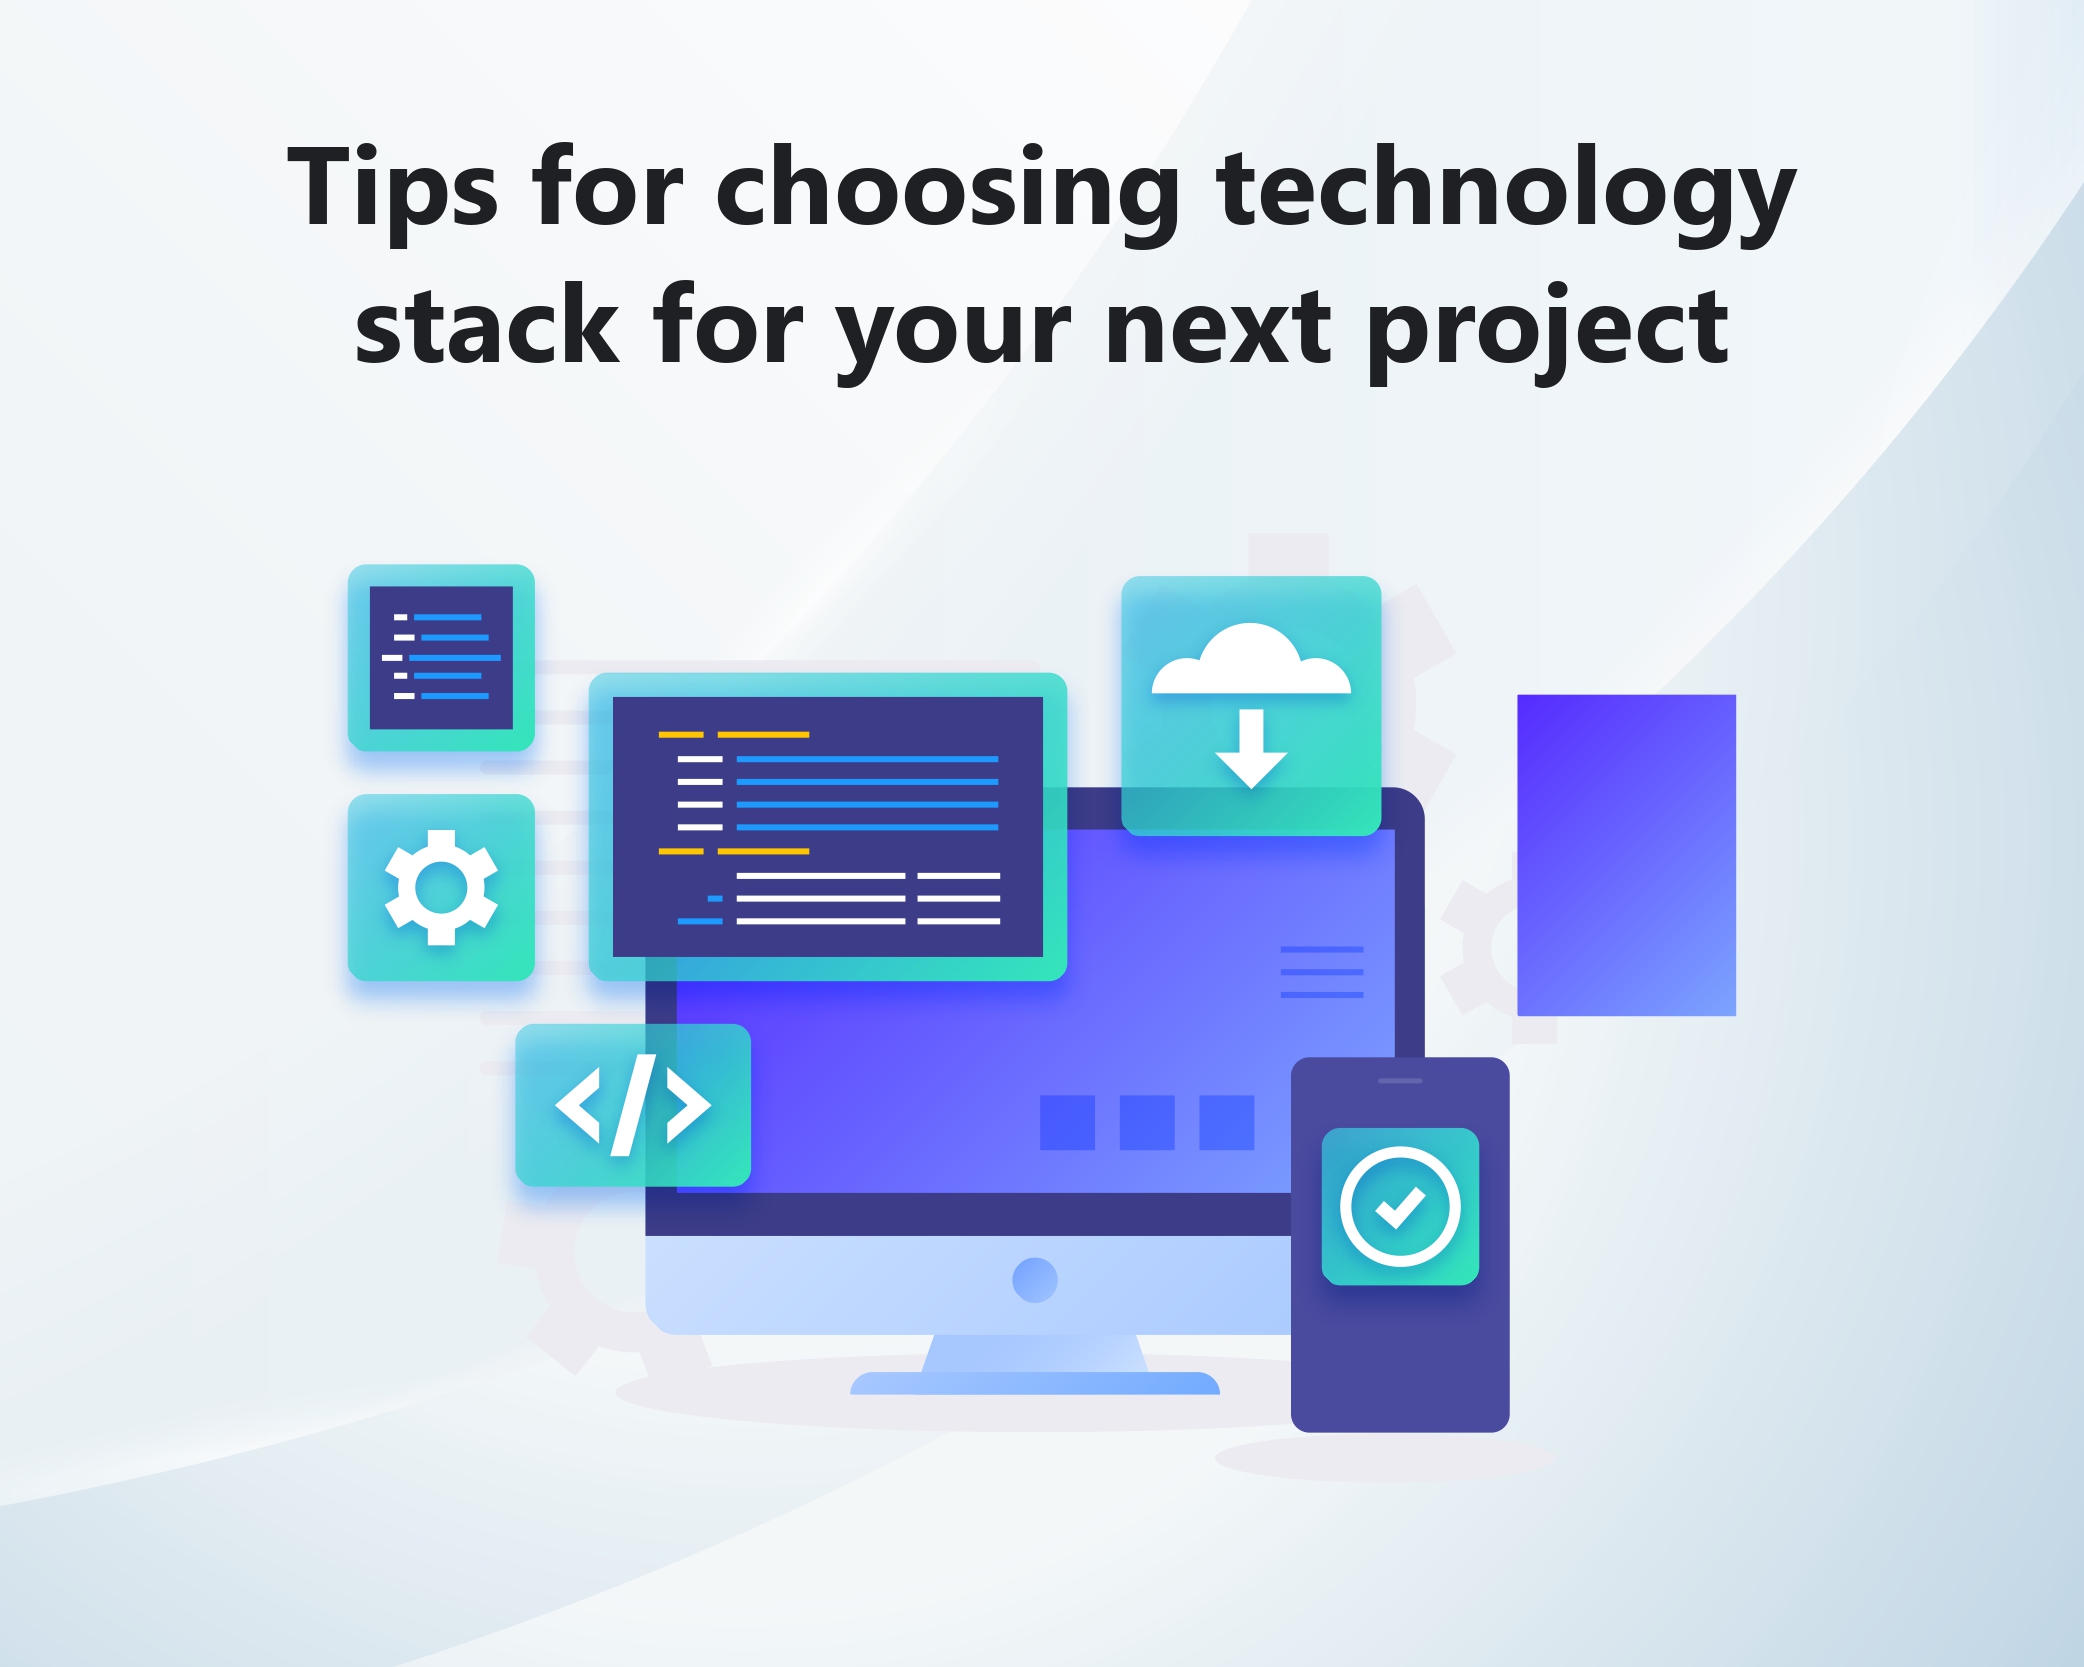 Tips for choosing technology stack for your next project